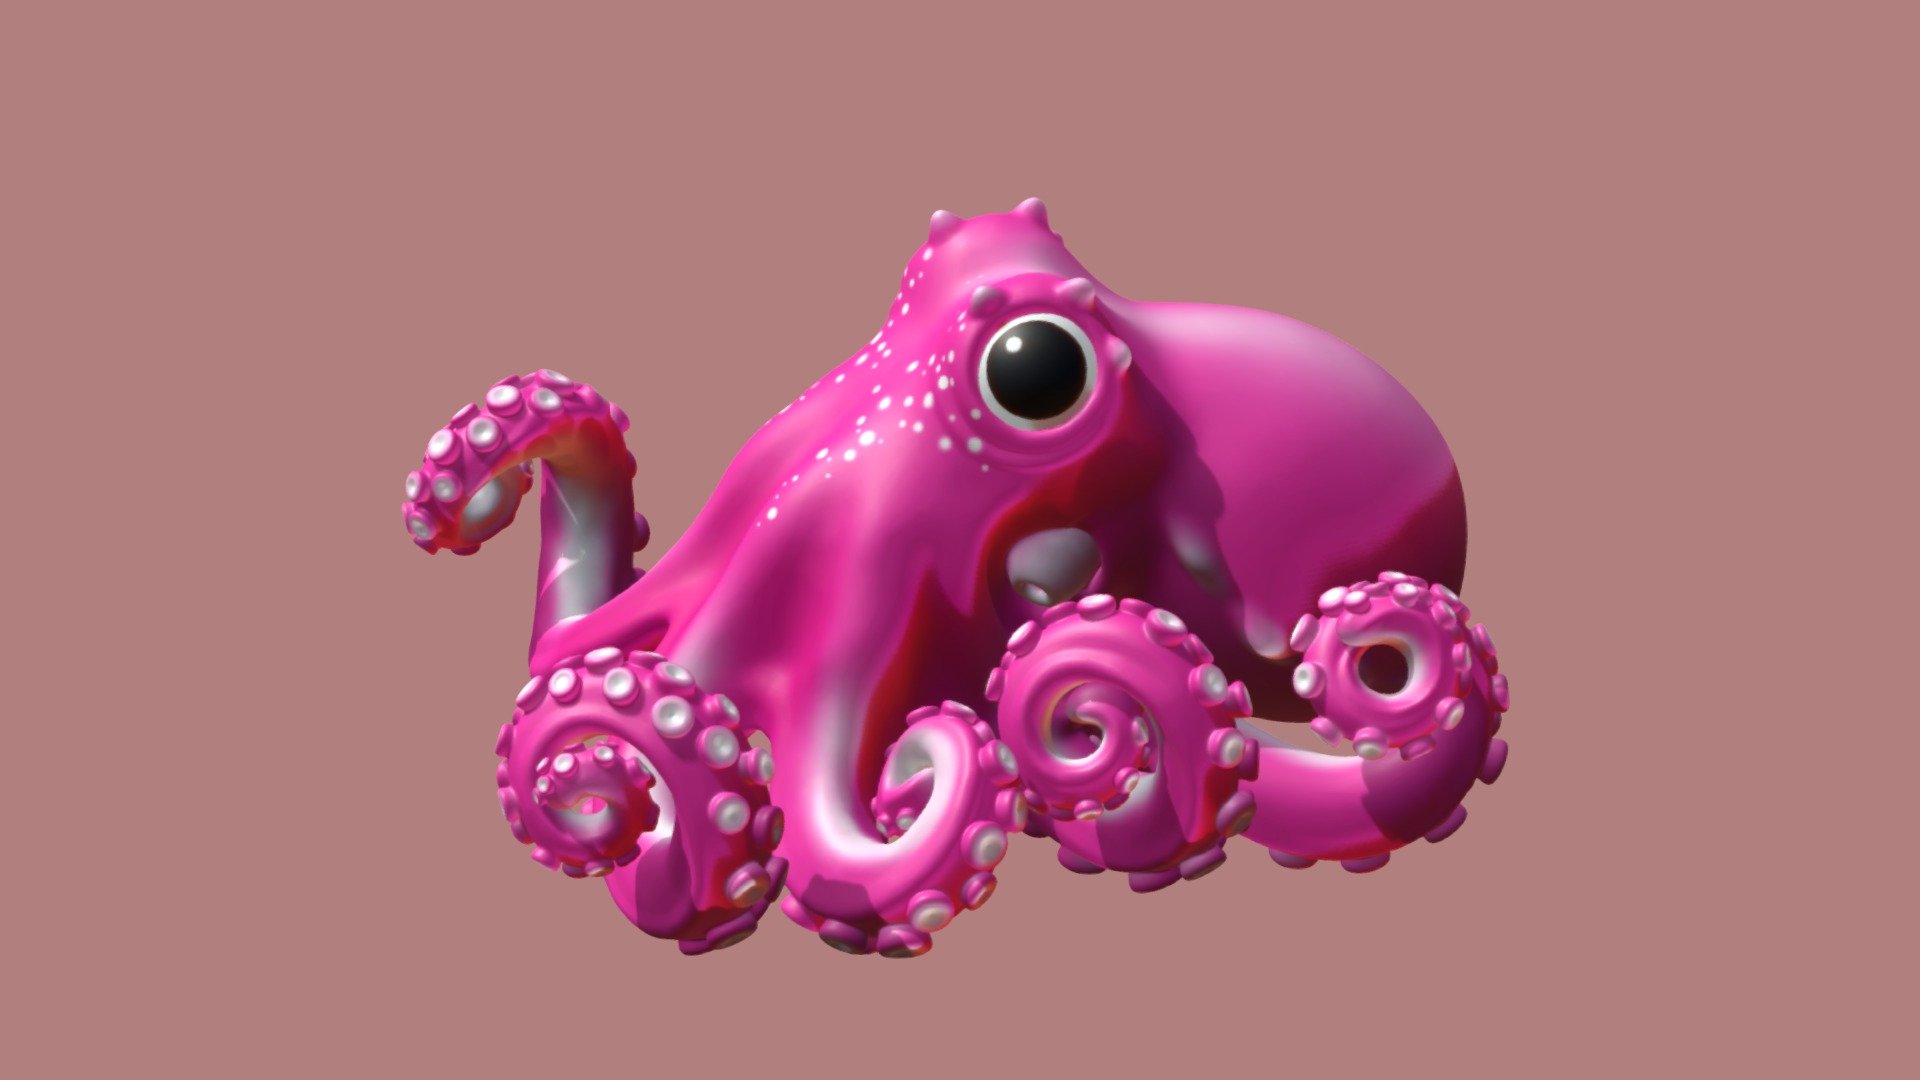 Deep sea octopus (Graneledone boreopacifica), The model was designed for 3d print purposes, it is watertight, vertex colour in 3D Print VRML file, the measurement in height is 4” inch. For real life references please refer to the link ( https://www.inaturalist.org/guide_taxa/986573 ) 
(P/S  I do not own the link) - Octopus (Graneledone boreopacifica ) - Buy Royalty Free 3D model by Leonth 3d model